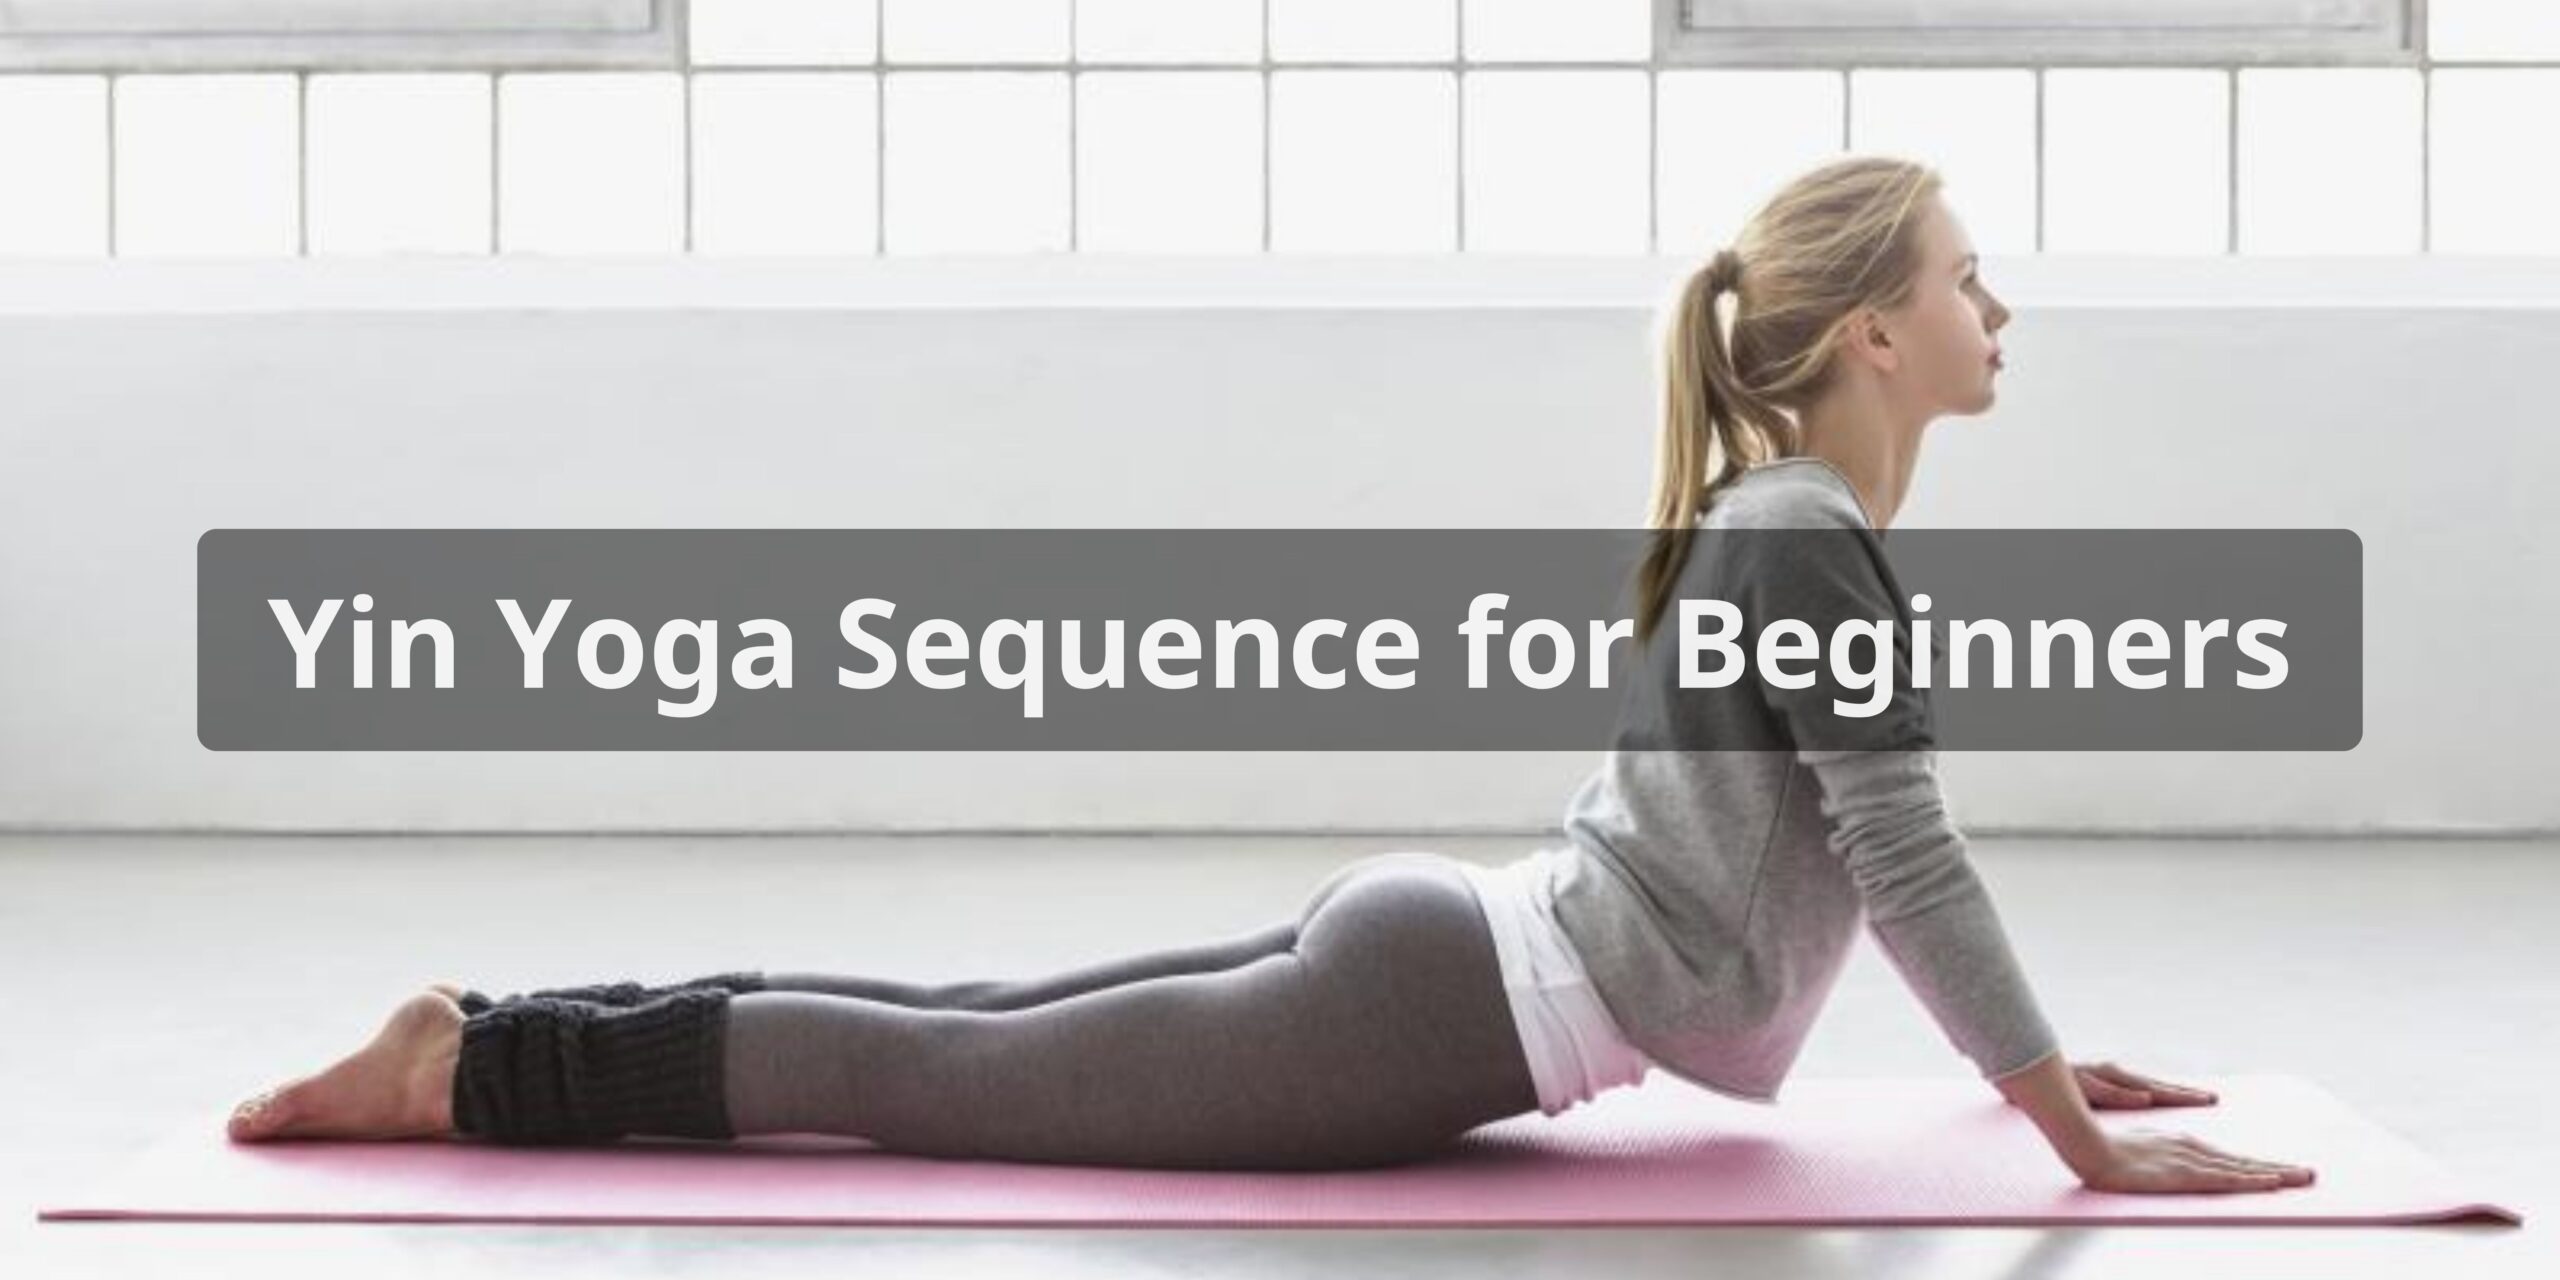 Yin Yoga Sequence for Beginners